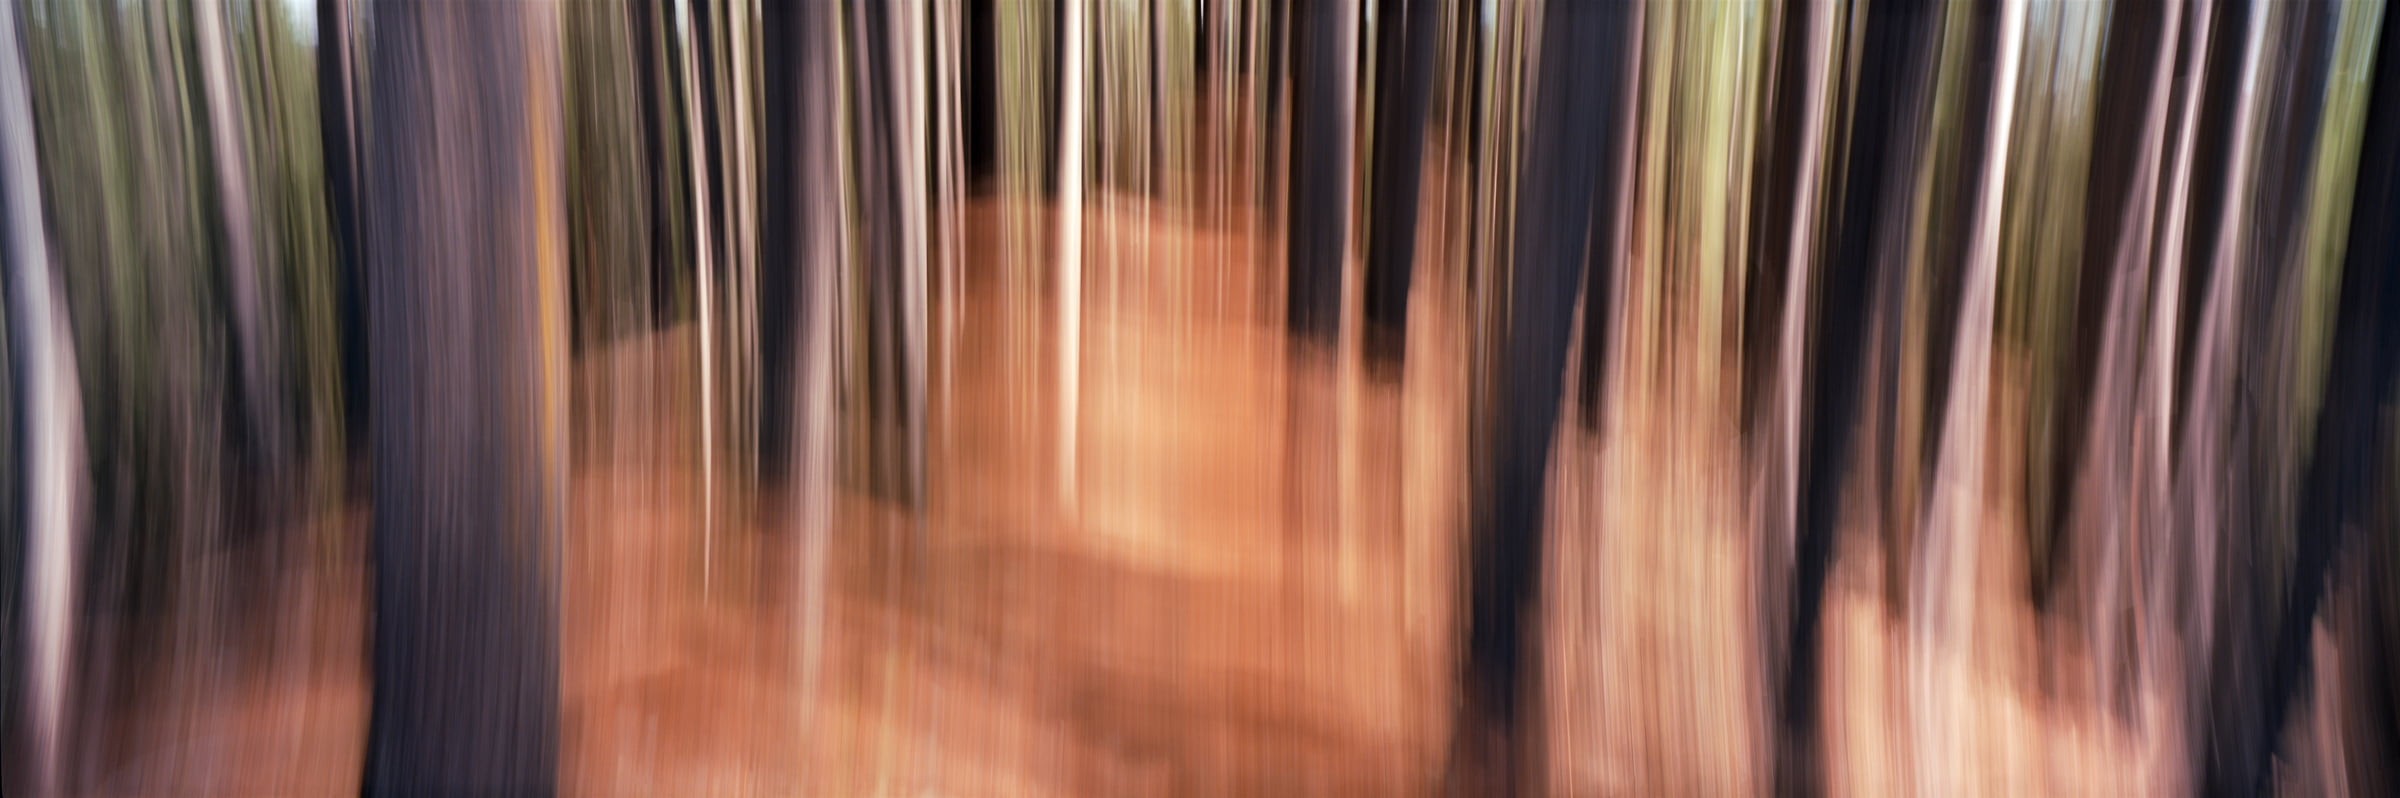 334 megapixels! A very high resolution, large-format VAST photo print of an abstract nature scene in a forest; fine art photograph created by Scott Dimond in Kimberley, British Columbia, Canada